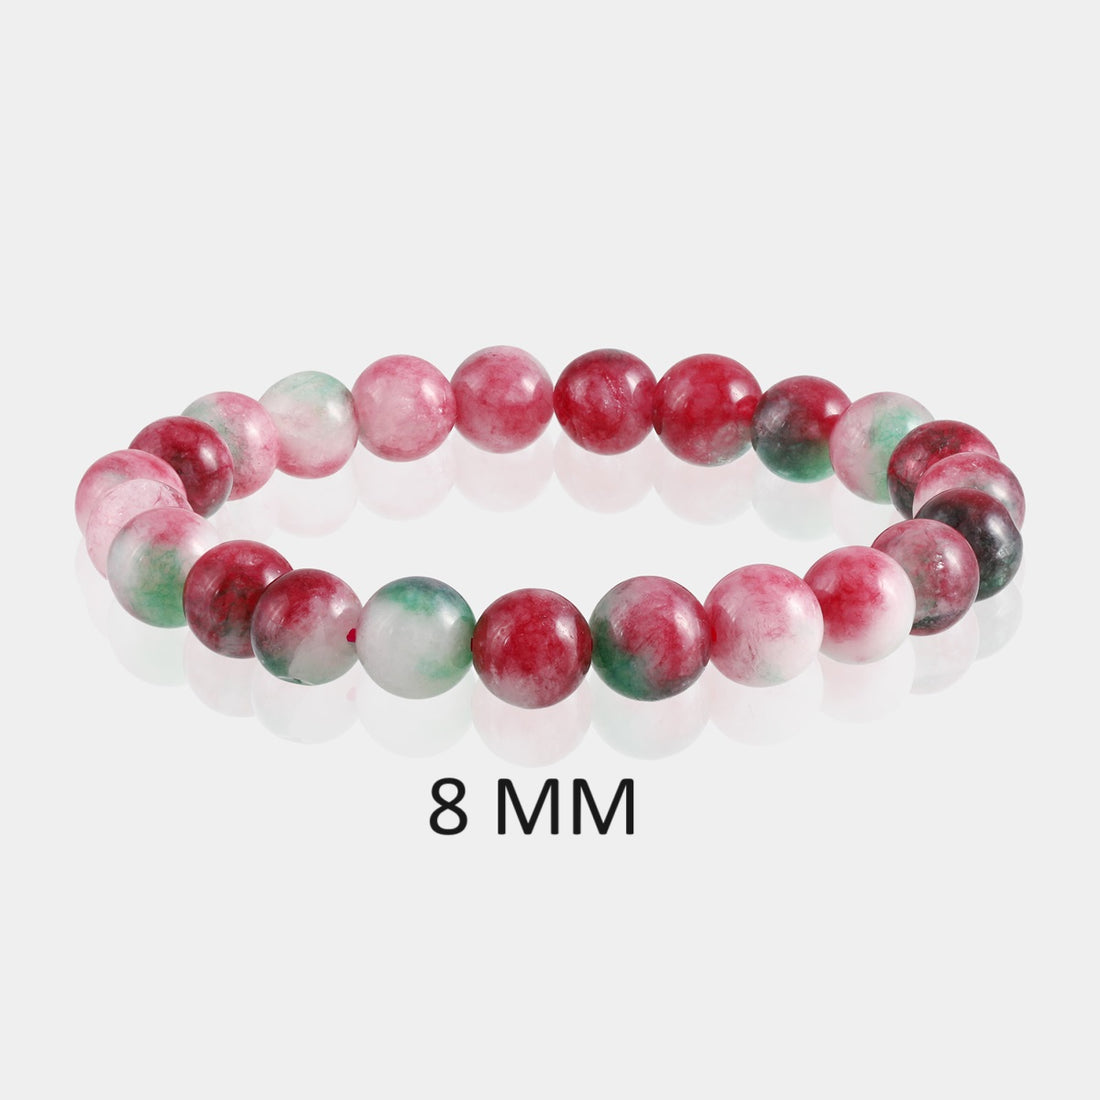 Artistic representation symbolizing love, featuring the Watermelon Quartz Stretch Bracelet as a token of affection and positive emotional energies